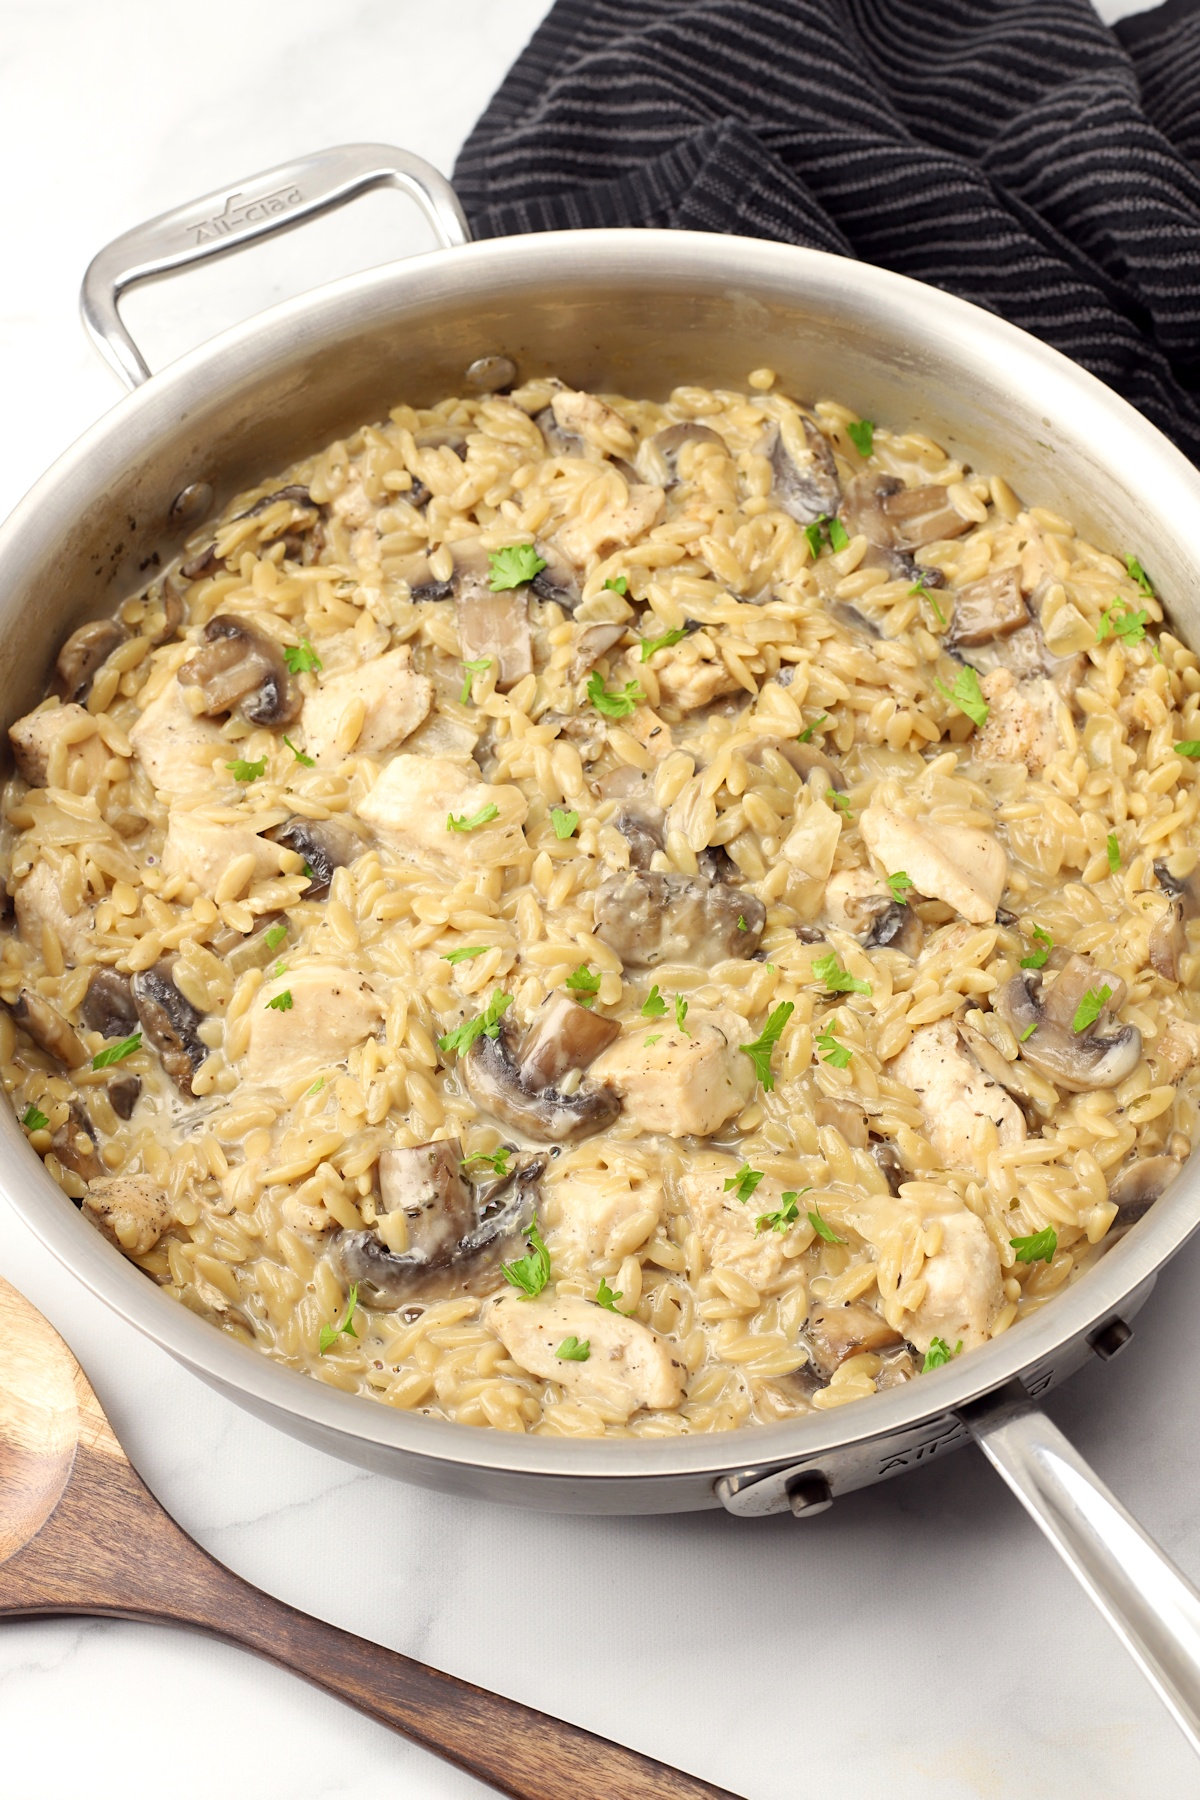 A saute pan filled with chicken, mushrooms, and orzo pasta.